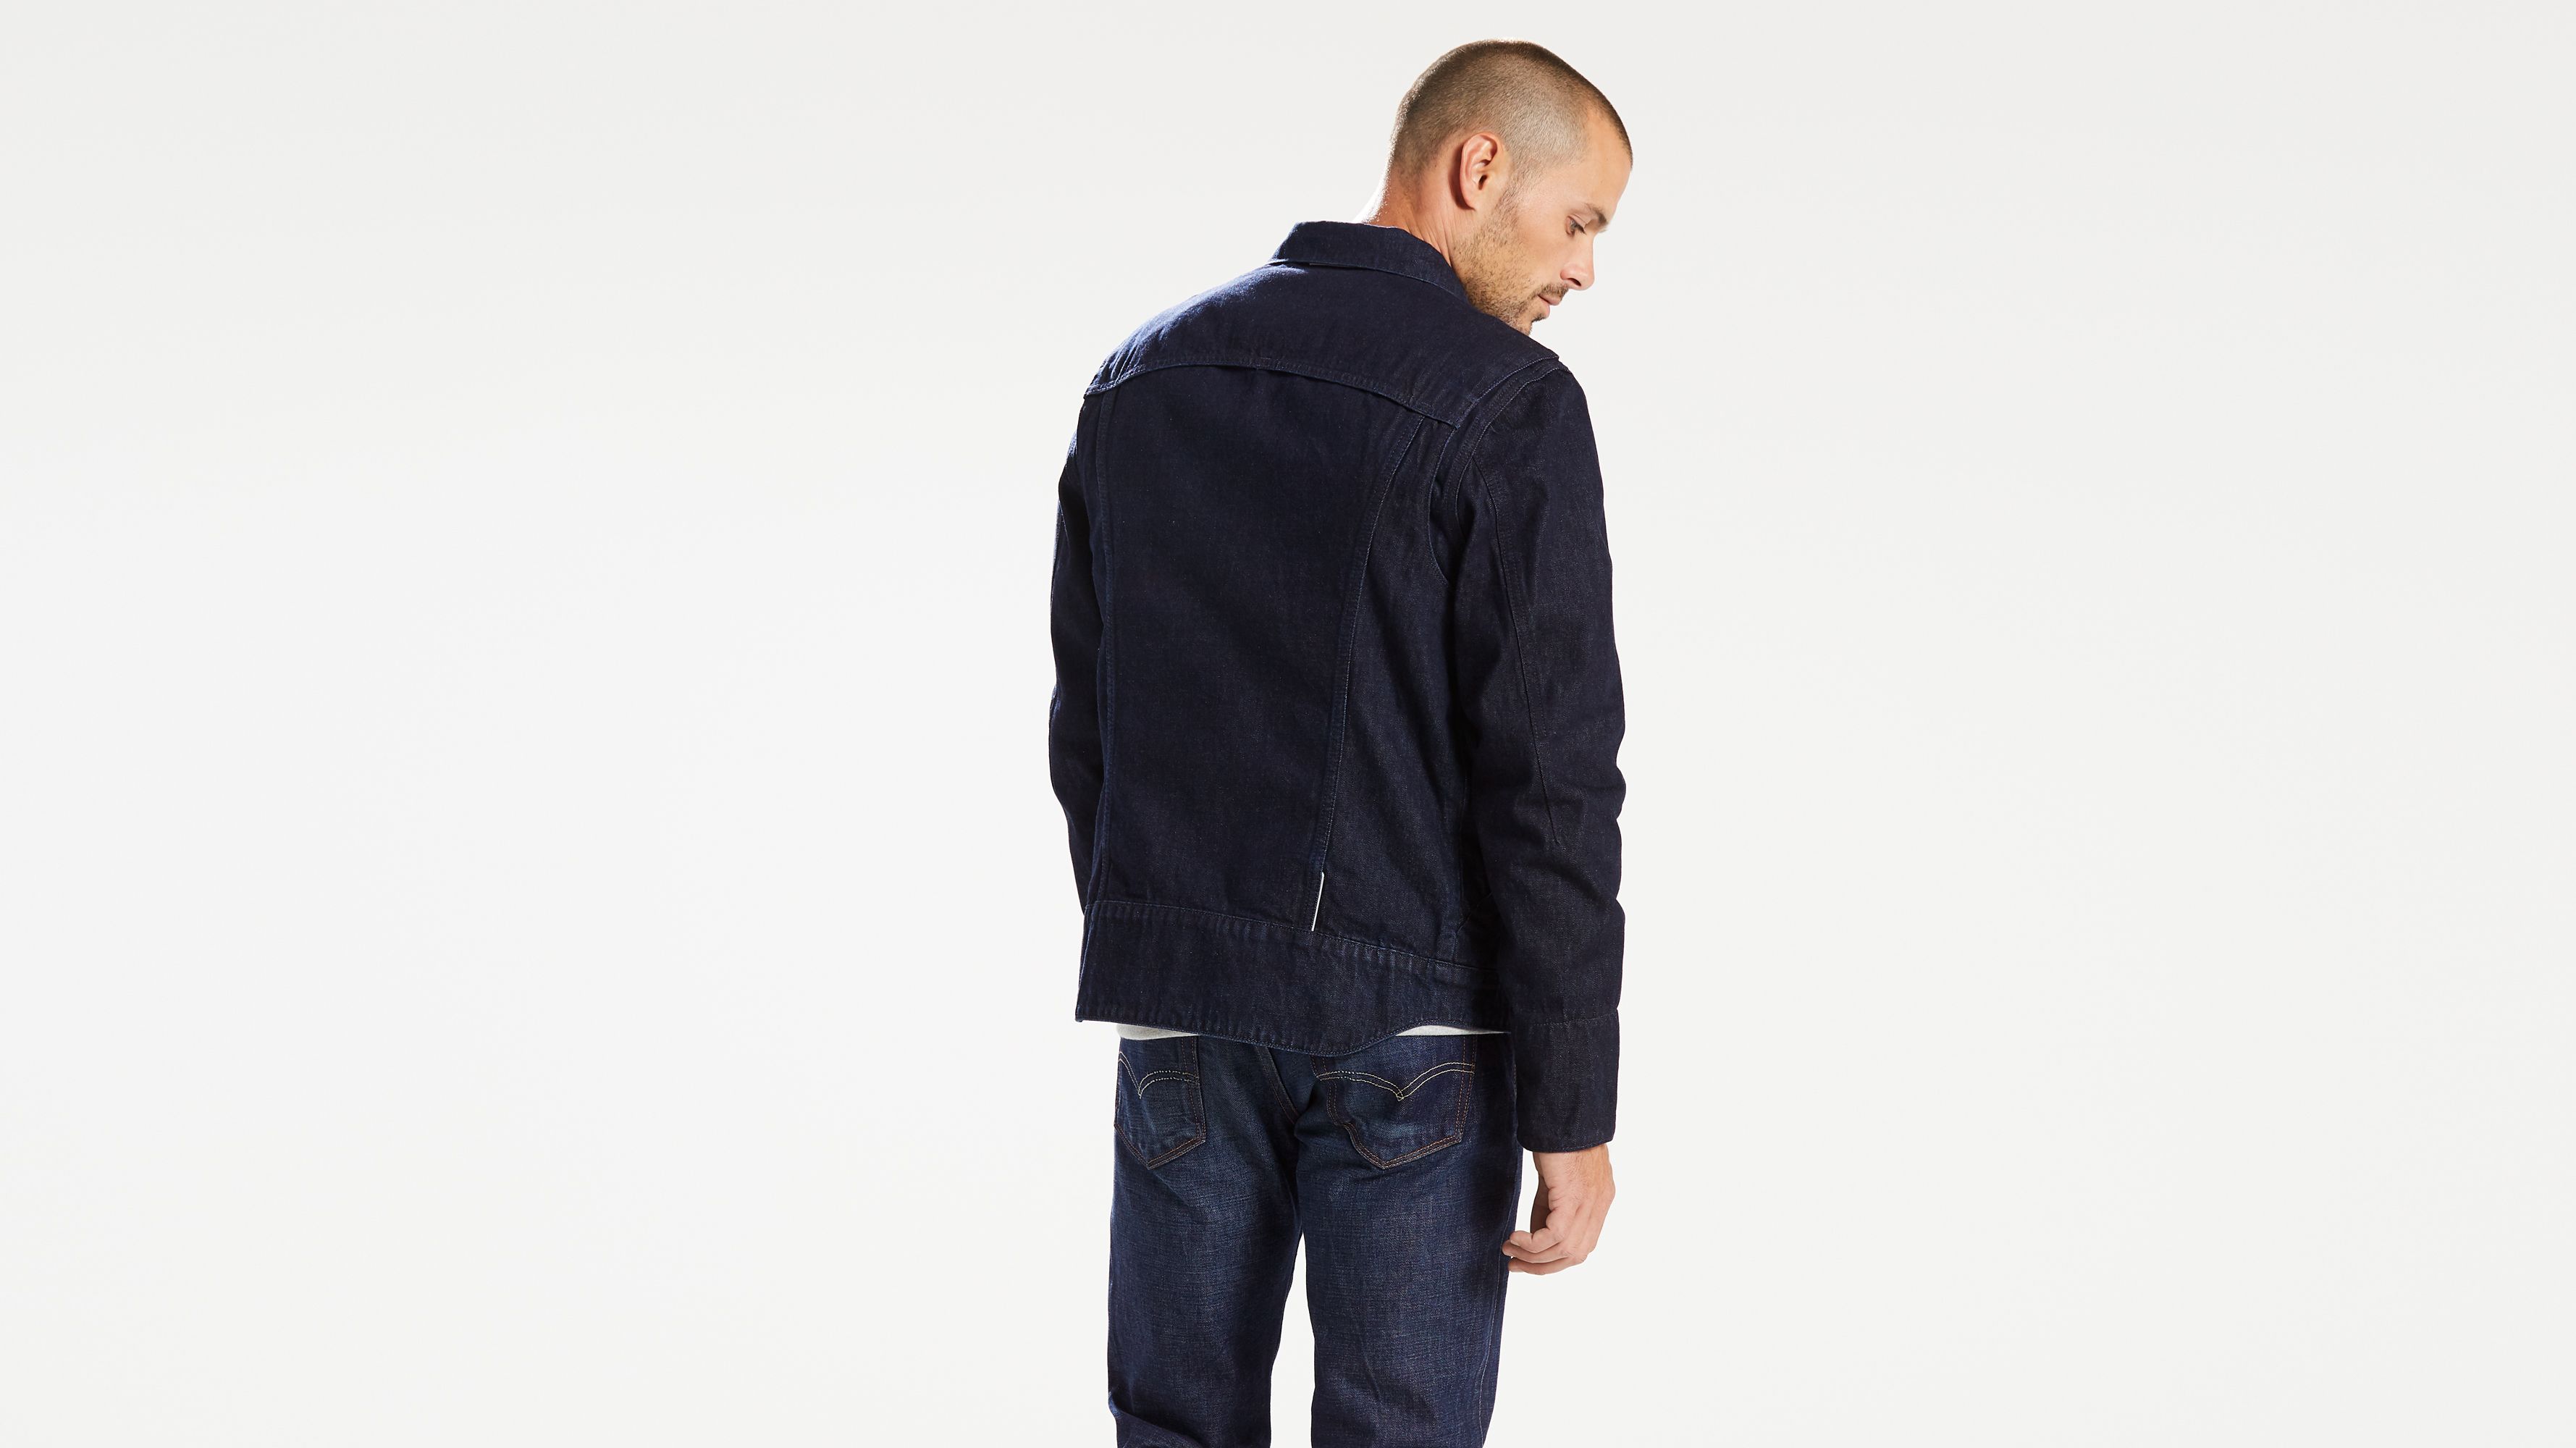 levi's commuter trucker jacket with jacquard